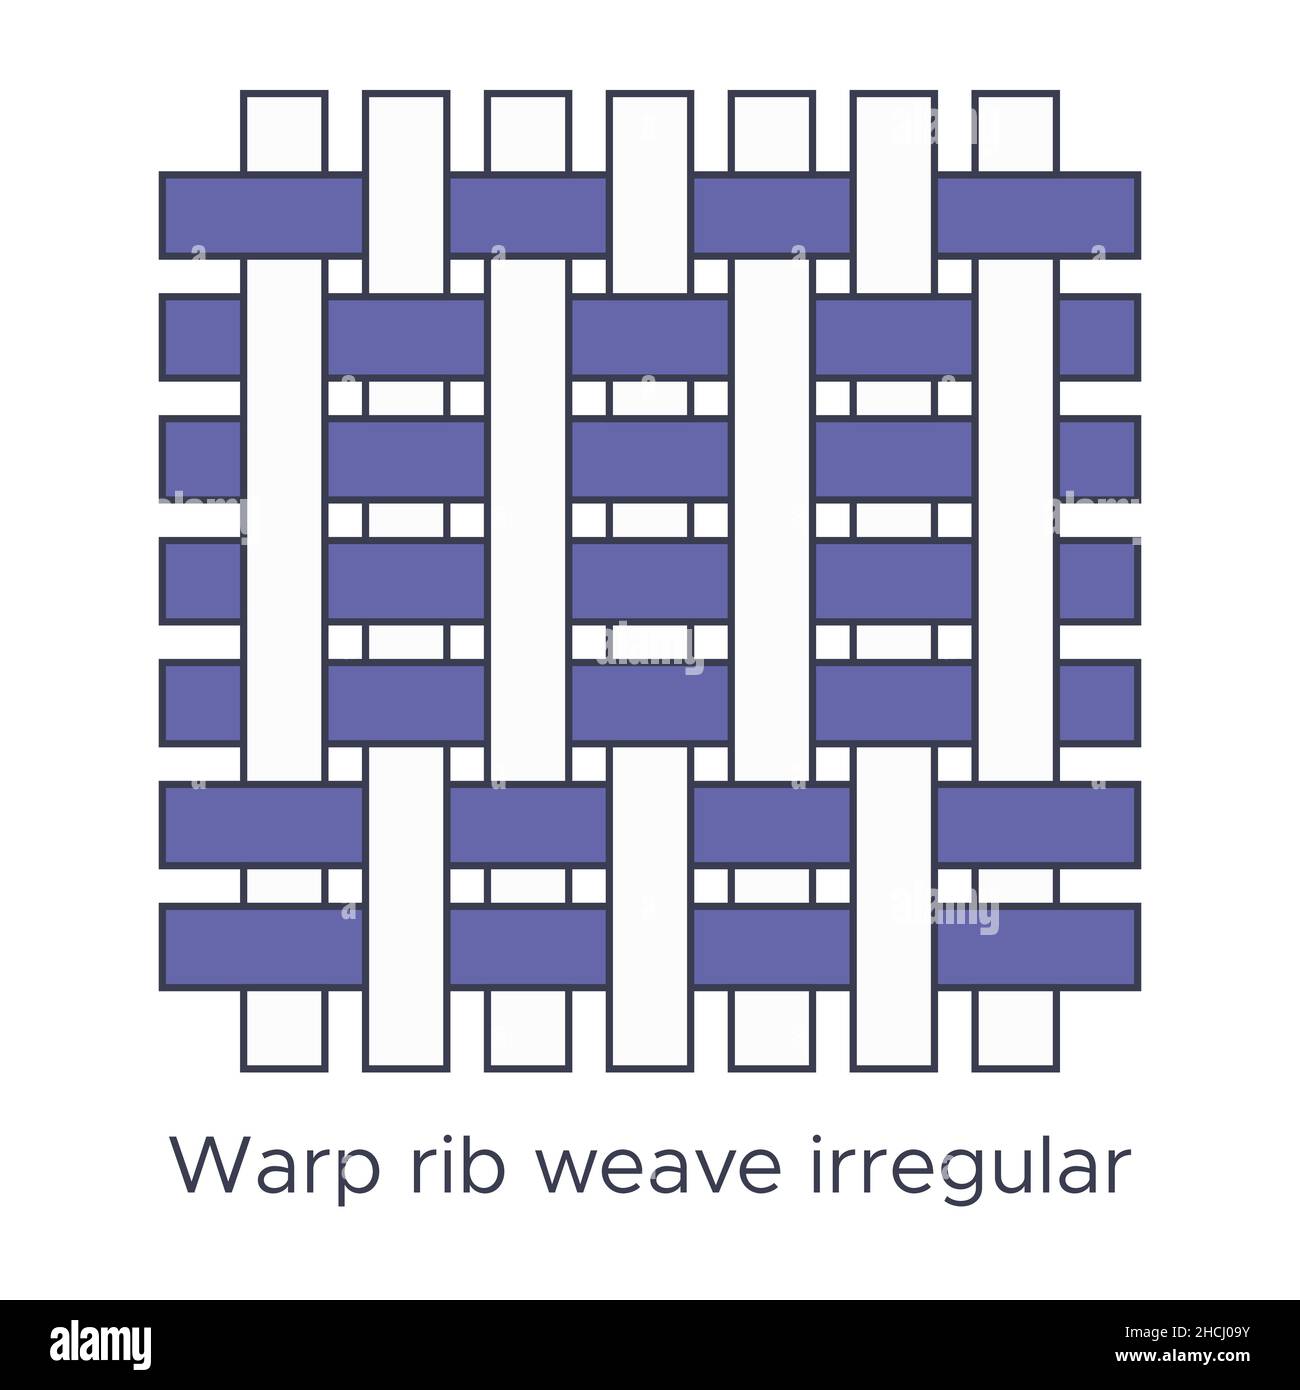 Fabric warp rib weave irregular type sample. Weave samples for textile education. Collection with pictogram line fabric swatch. Vector illustration in Stock Vector